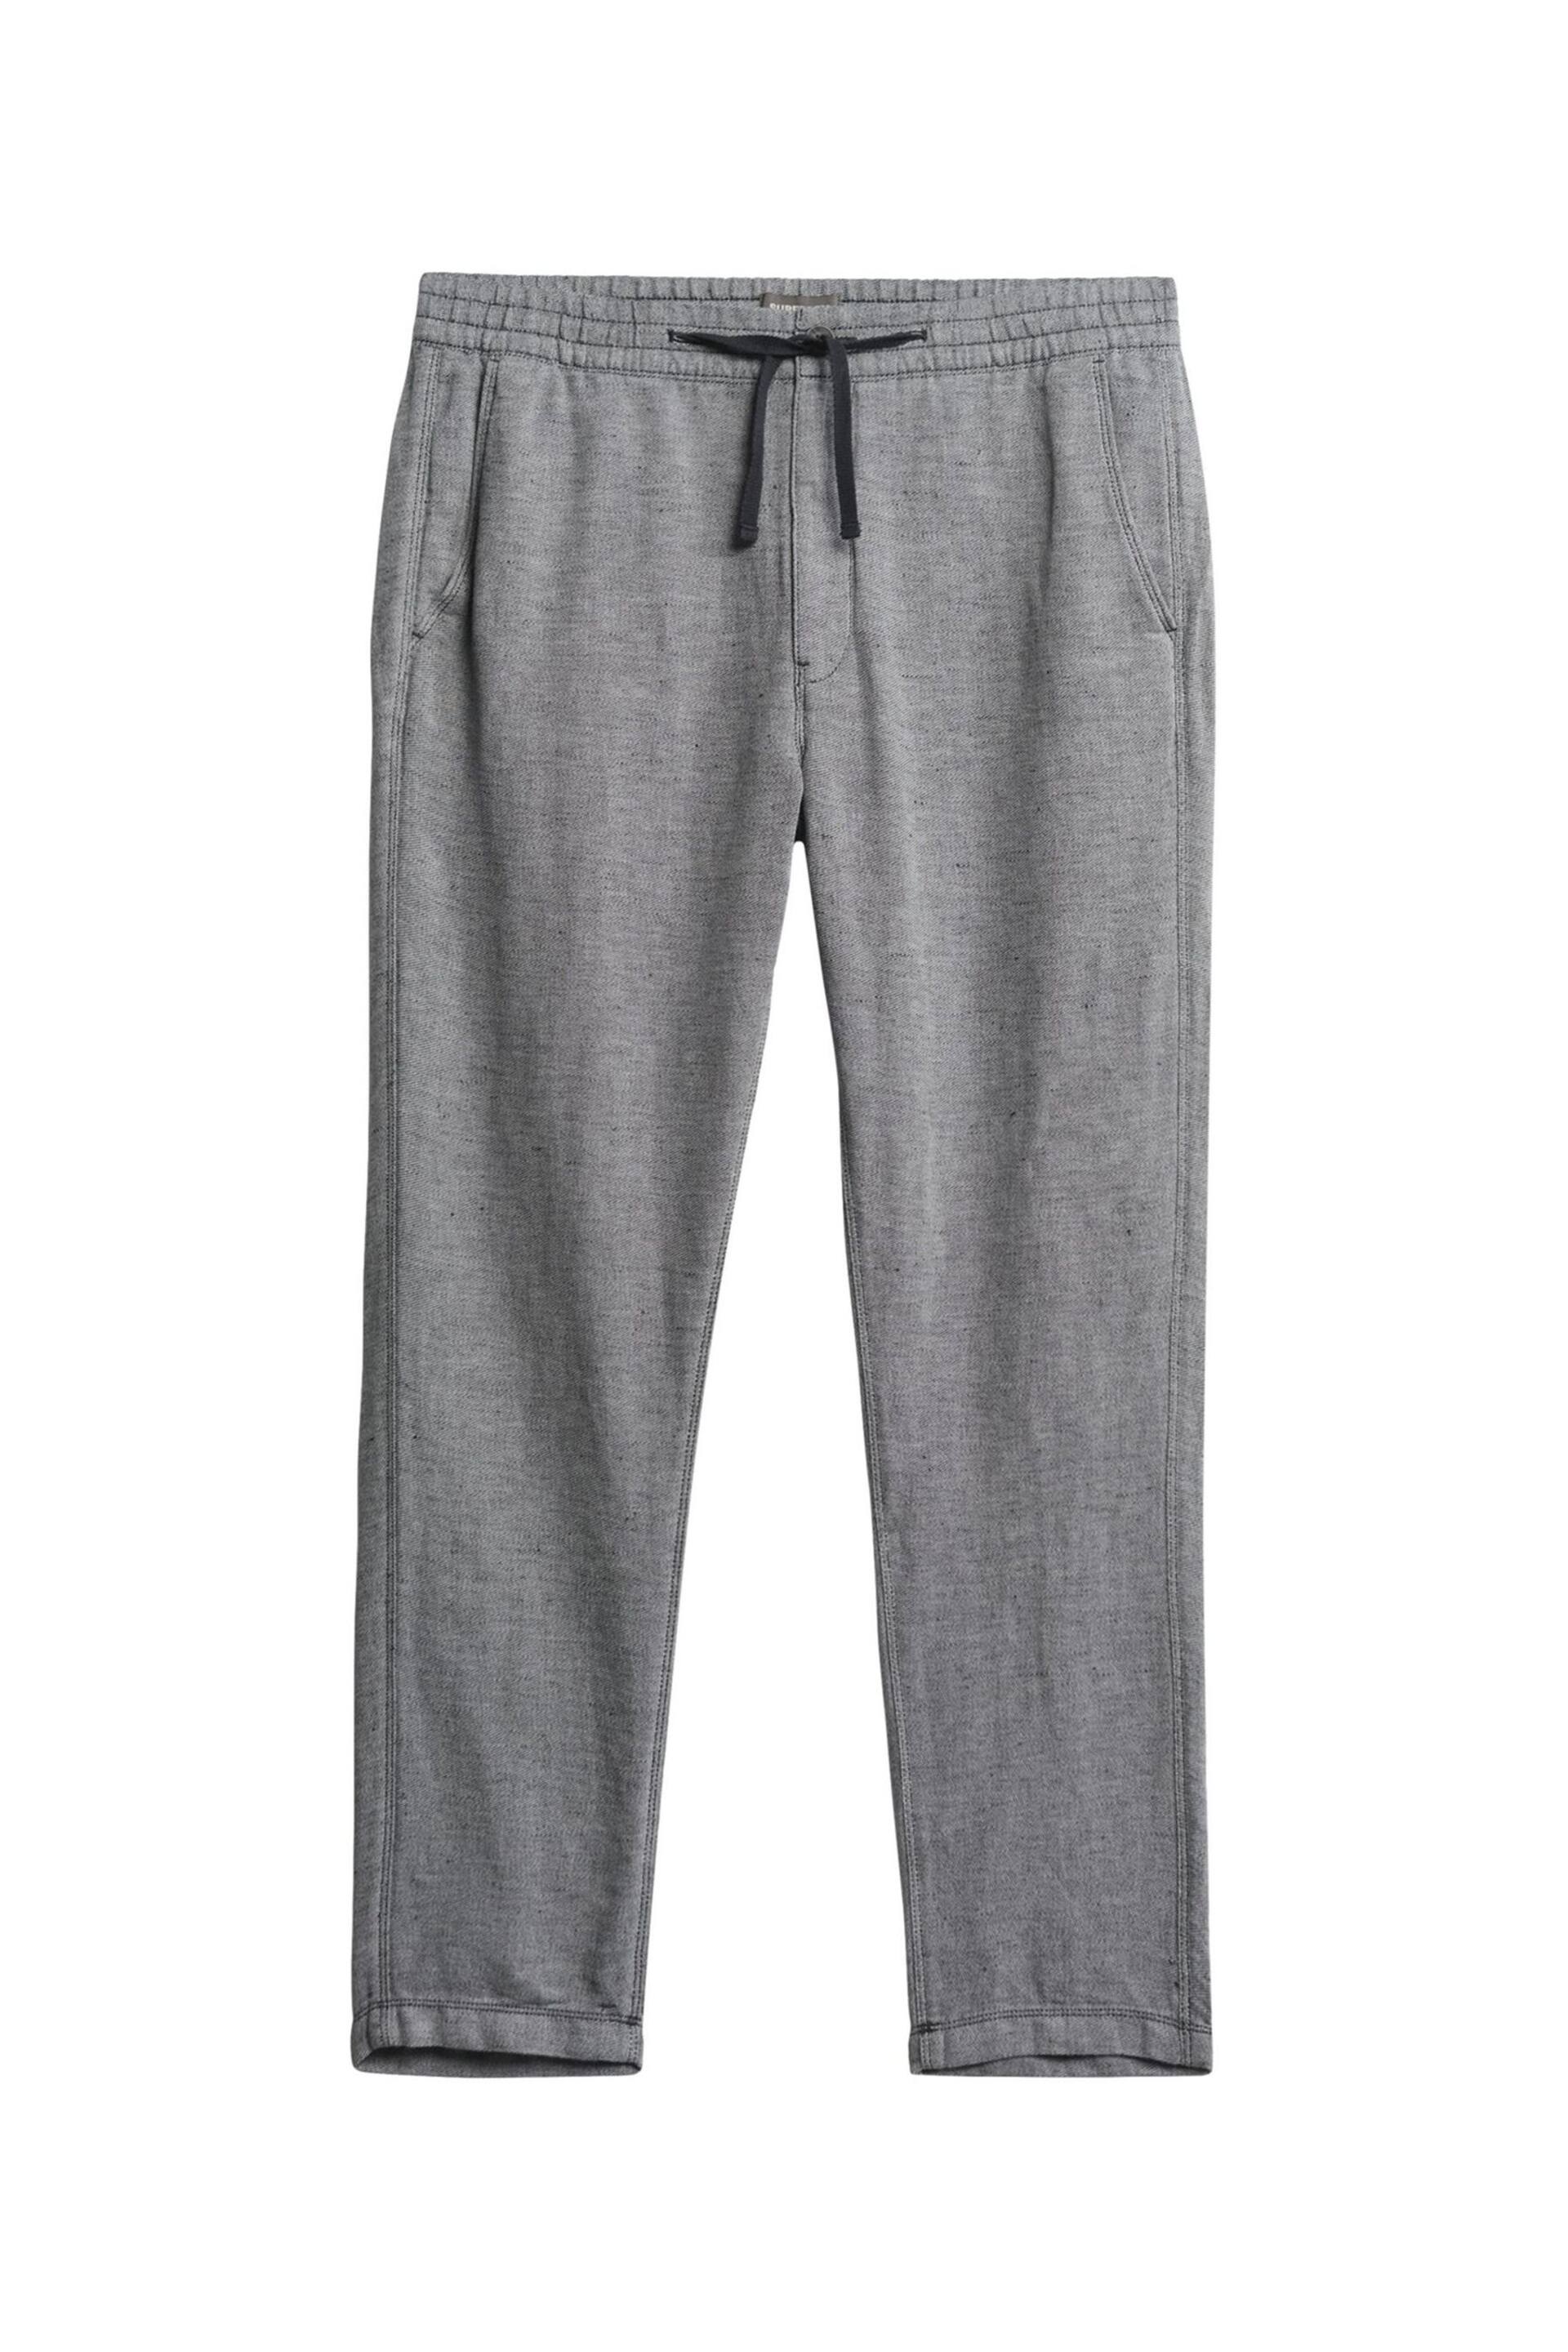 Superdry Grey Drawstring Linen Trousers - Image 5 of 5